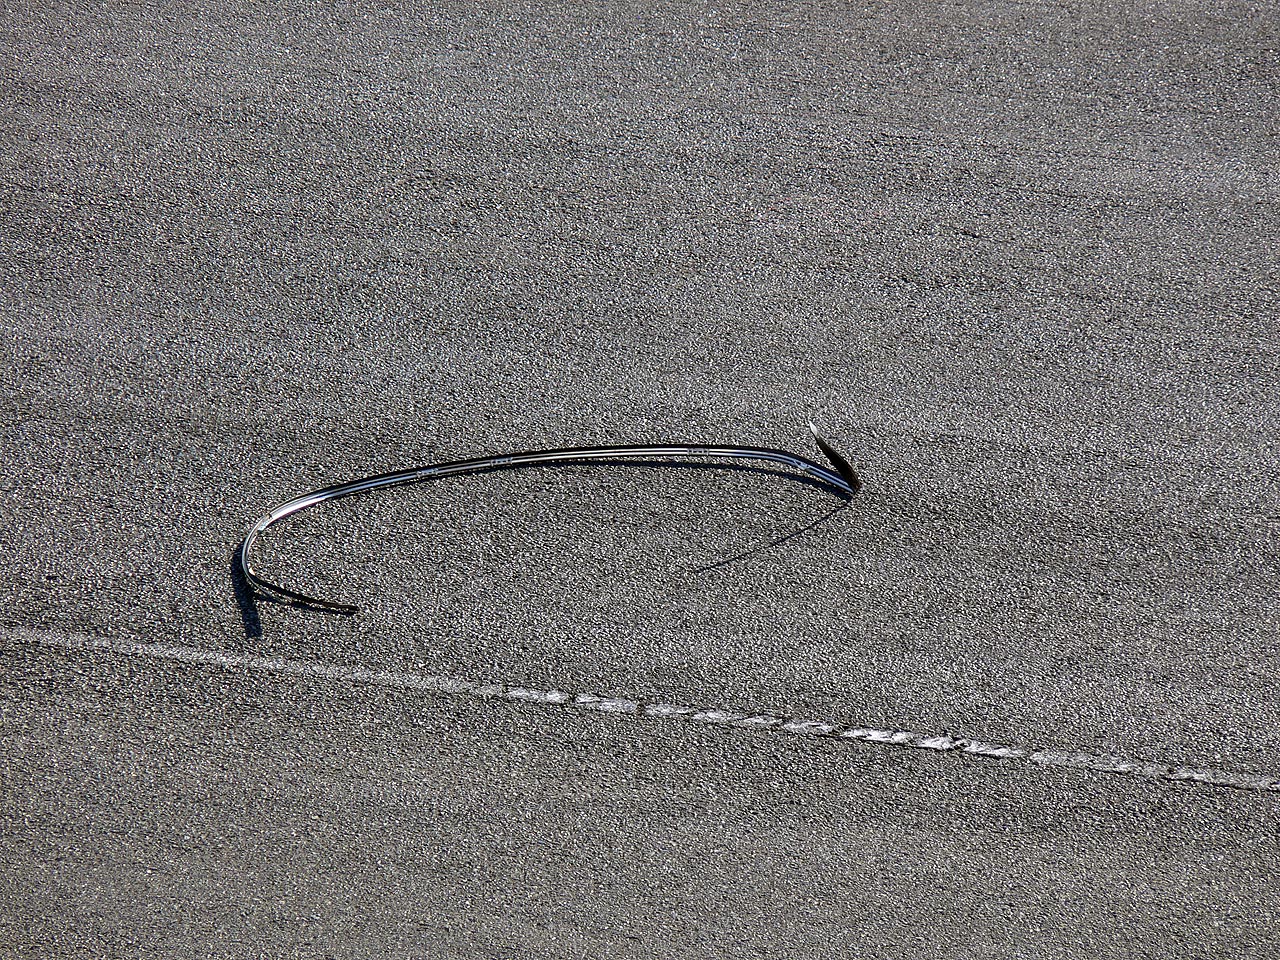 Roof trim from the Cyber Evo, ripped off at high speed down the long Eastern Creek pit lane straight